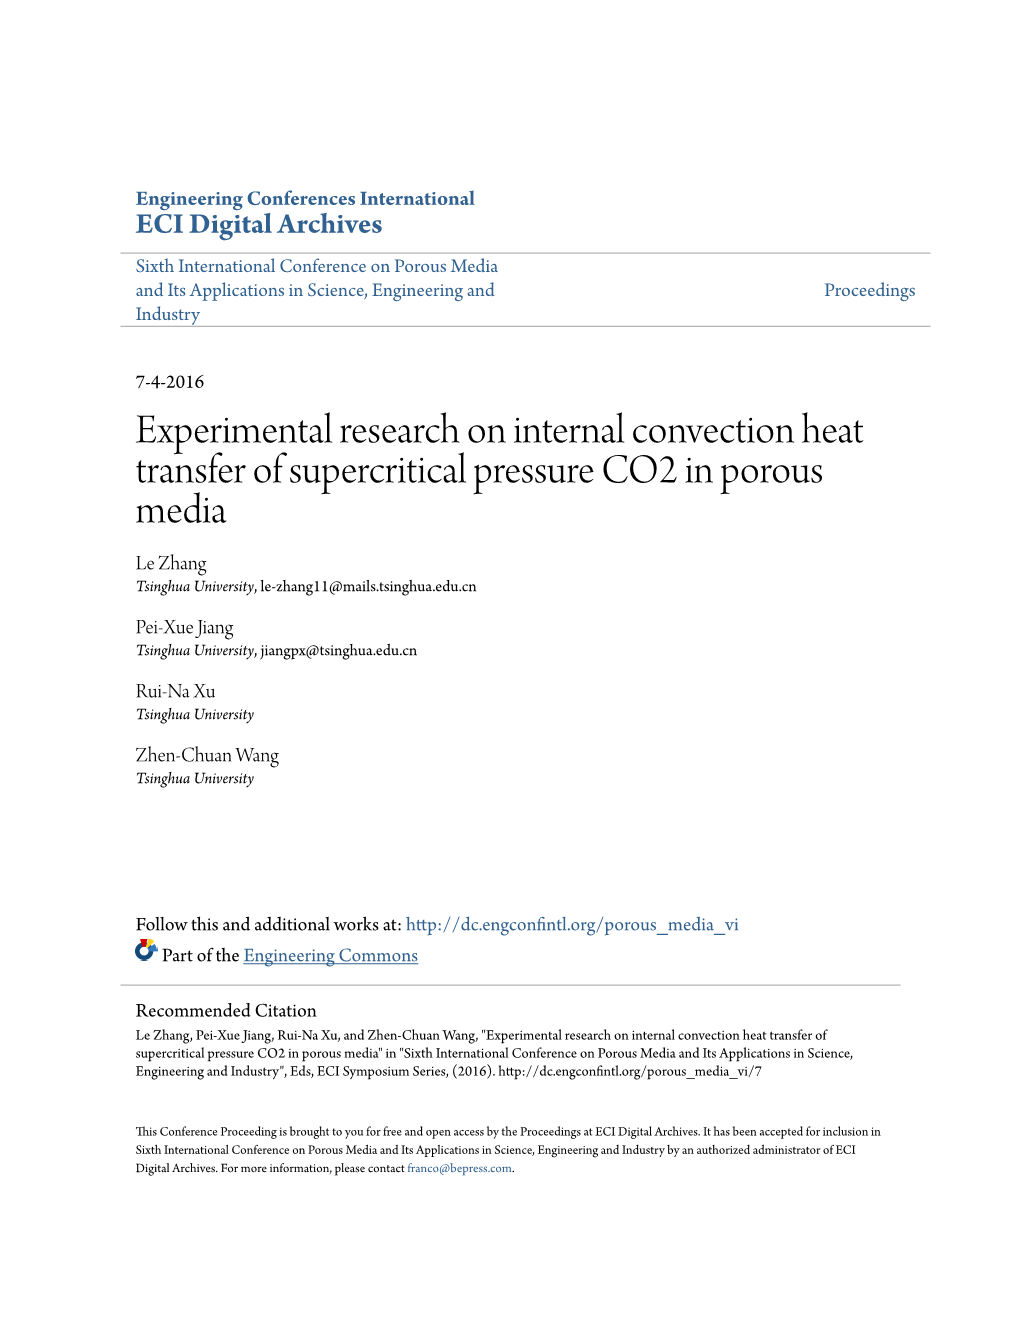 Experimental Research on Internal Convection Heat Transfer Of